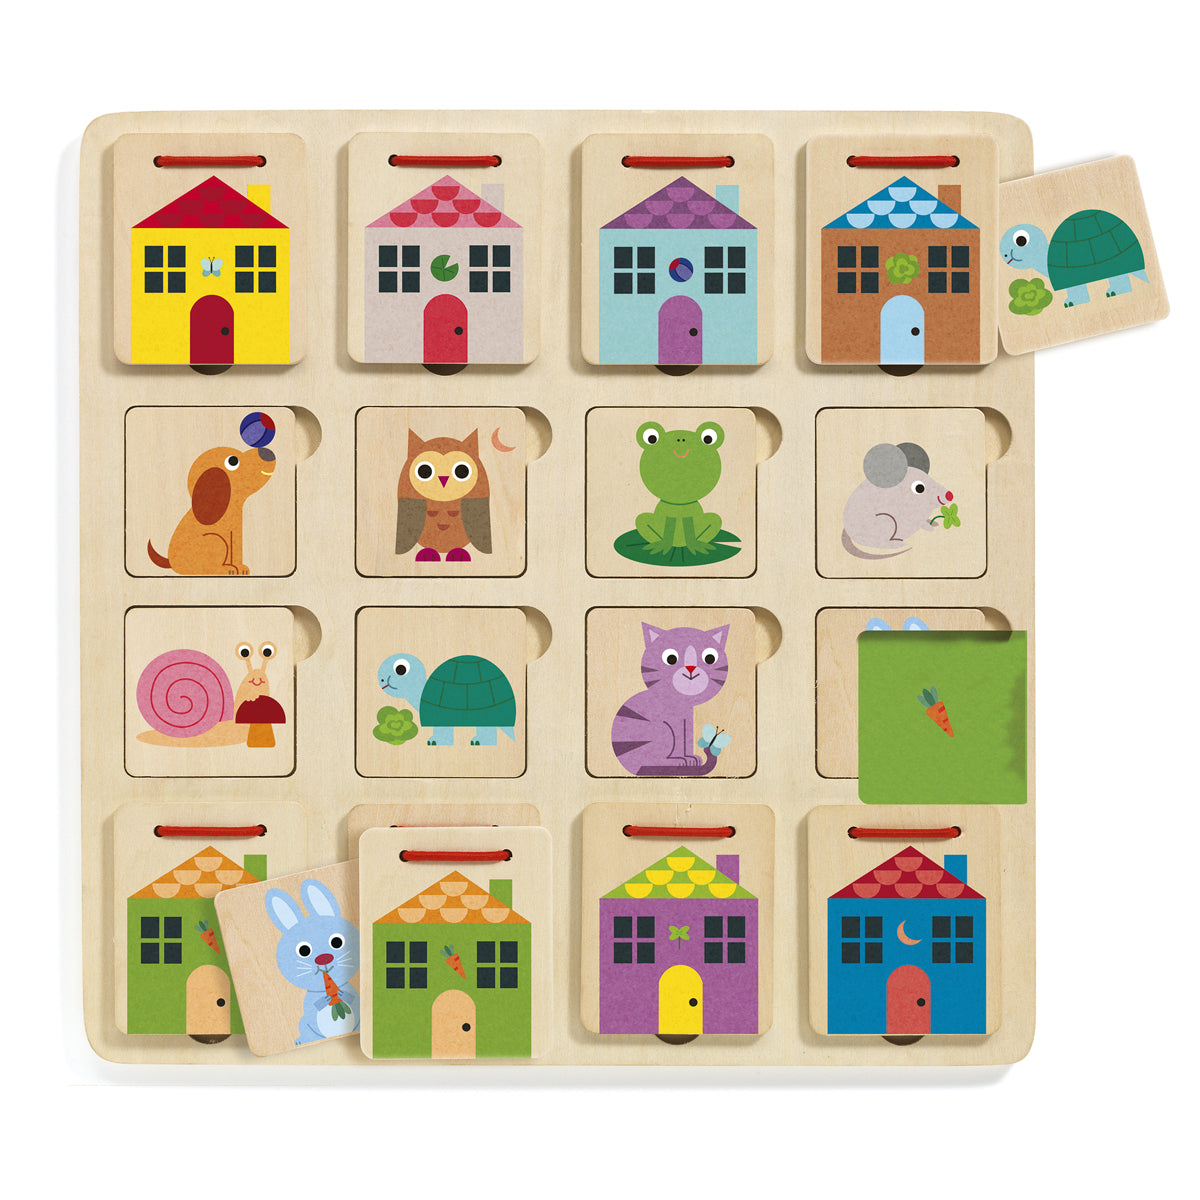 Cabanimo hide and seek wooden puzzle from Djeco